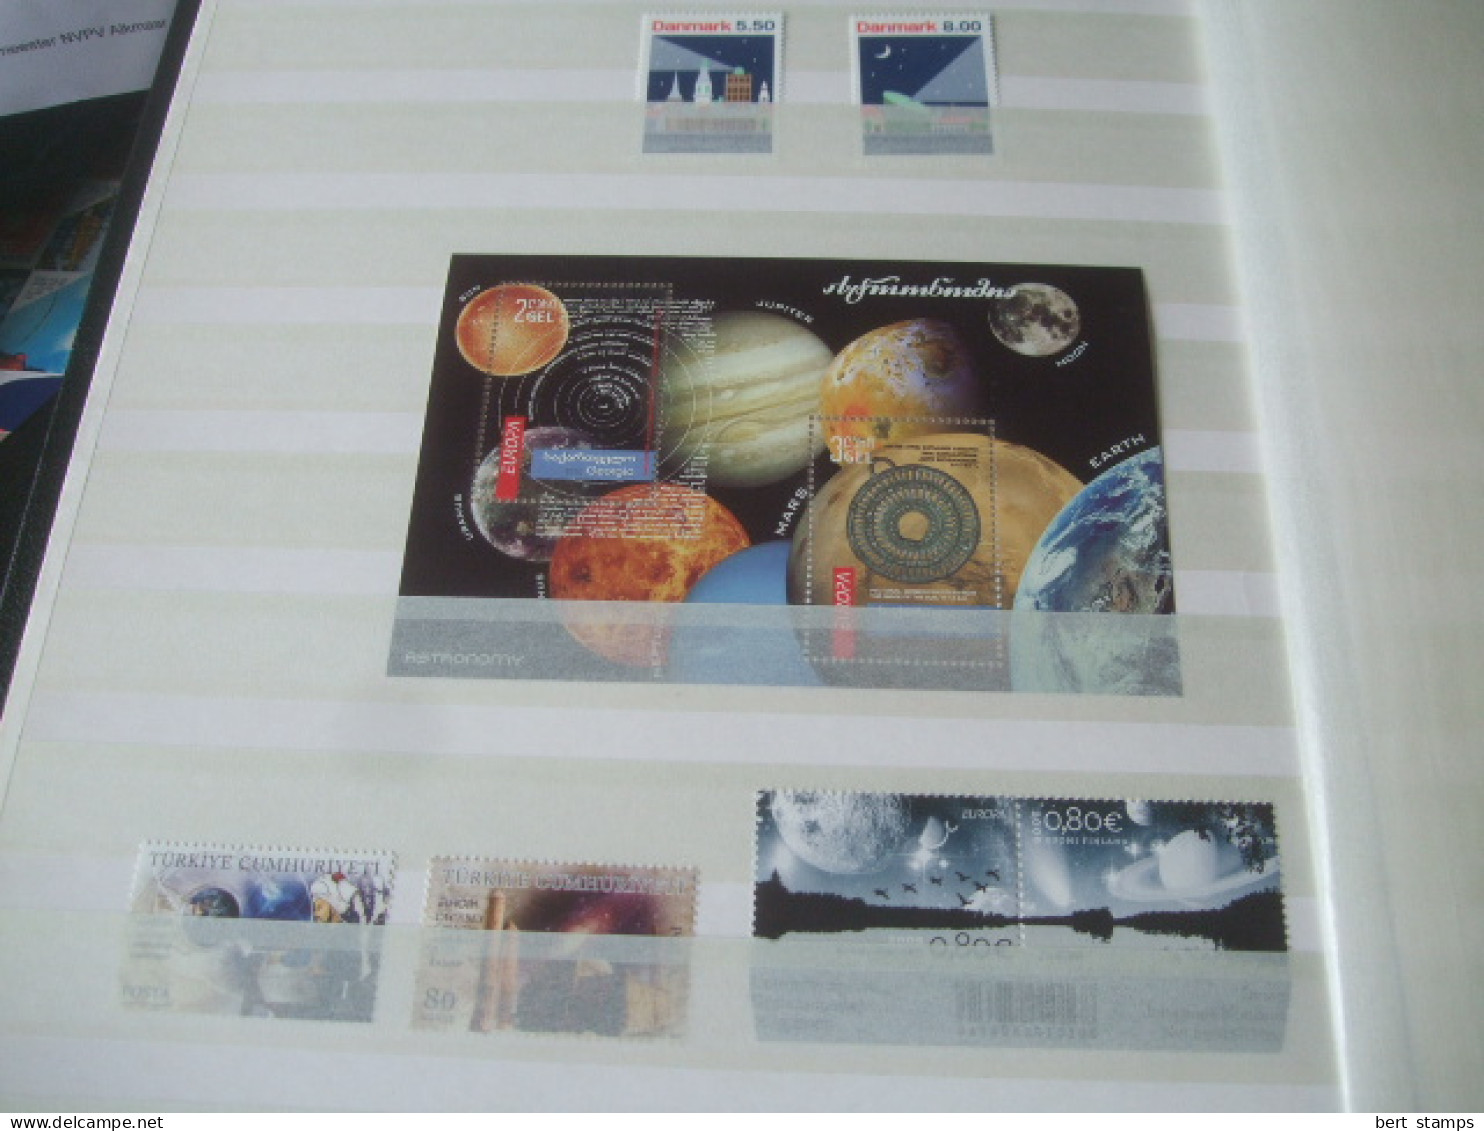 Collectiuon Europe CEPT 2009 MNH stamps and sheets.